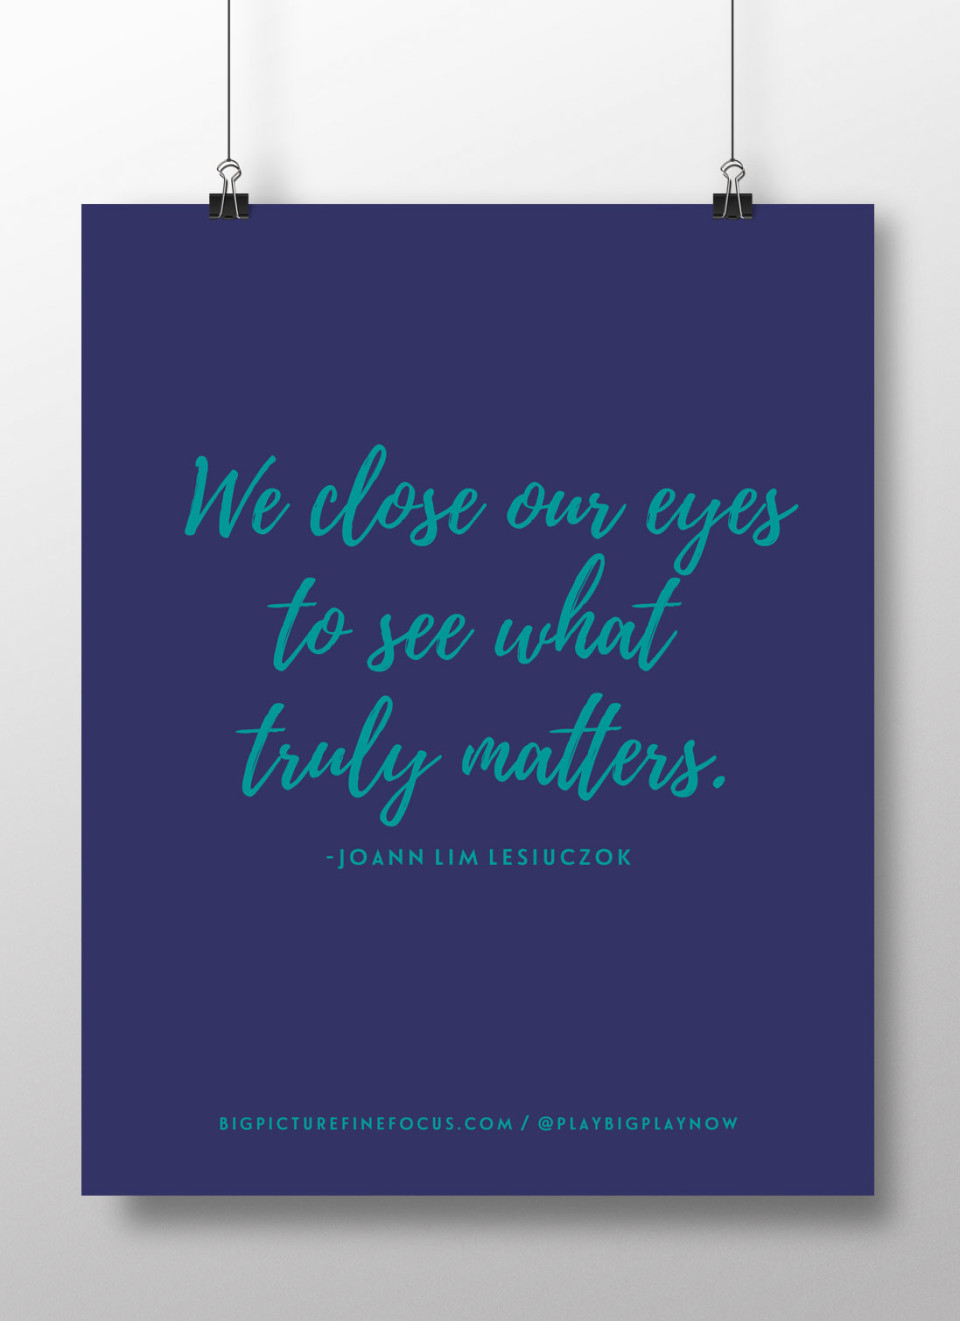 We-close-our-eyes-to-see-what-truly-matters